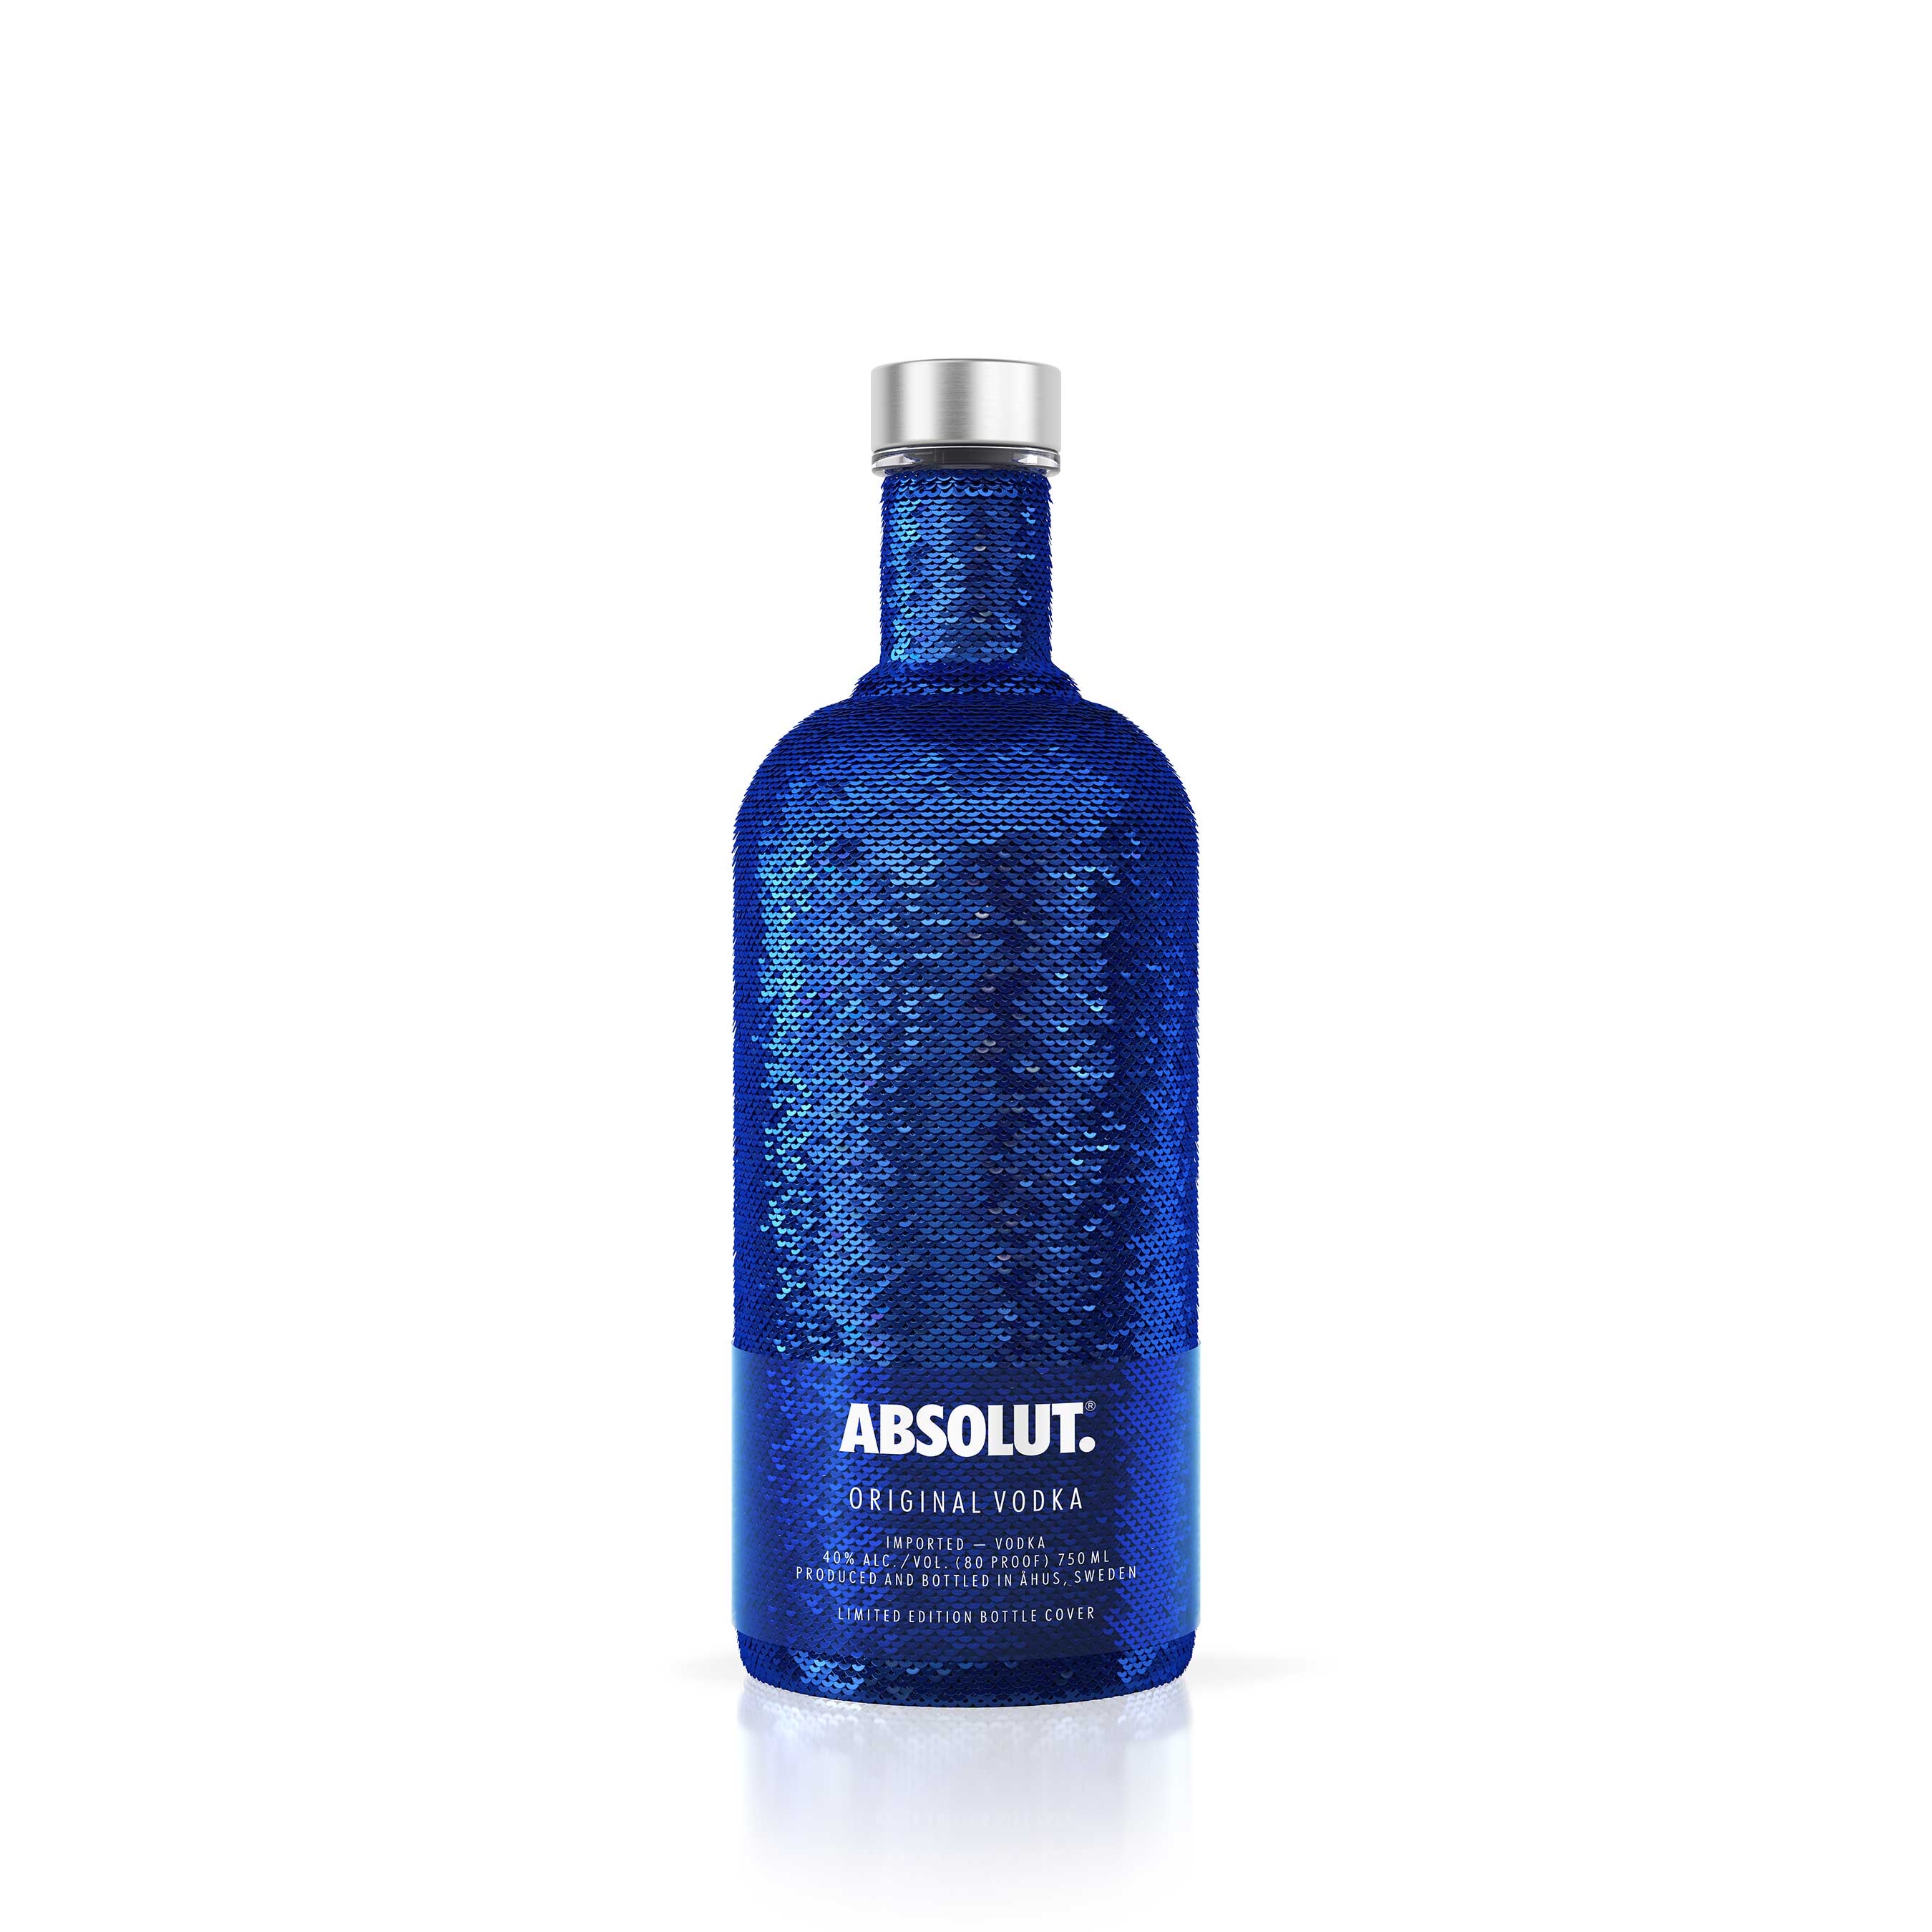 Absolut's limited edition sequin bottle cover changes color from sapphire to silver with a simple swipe.